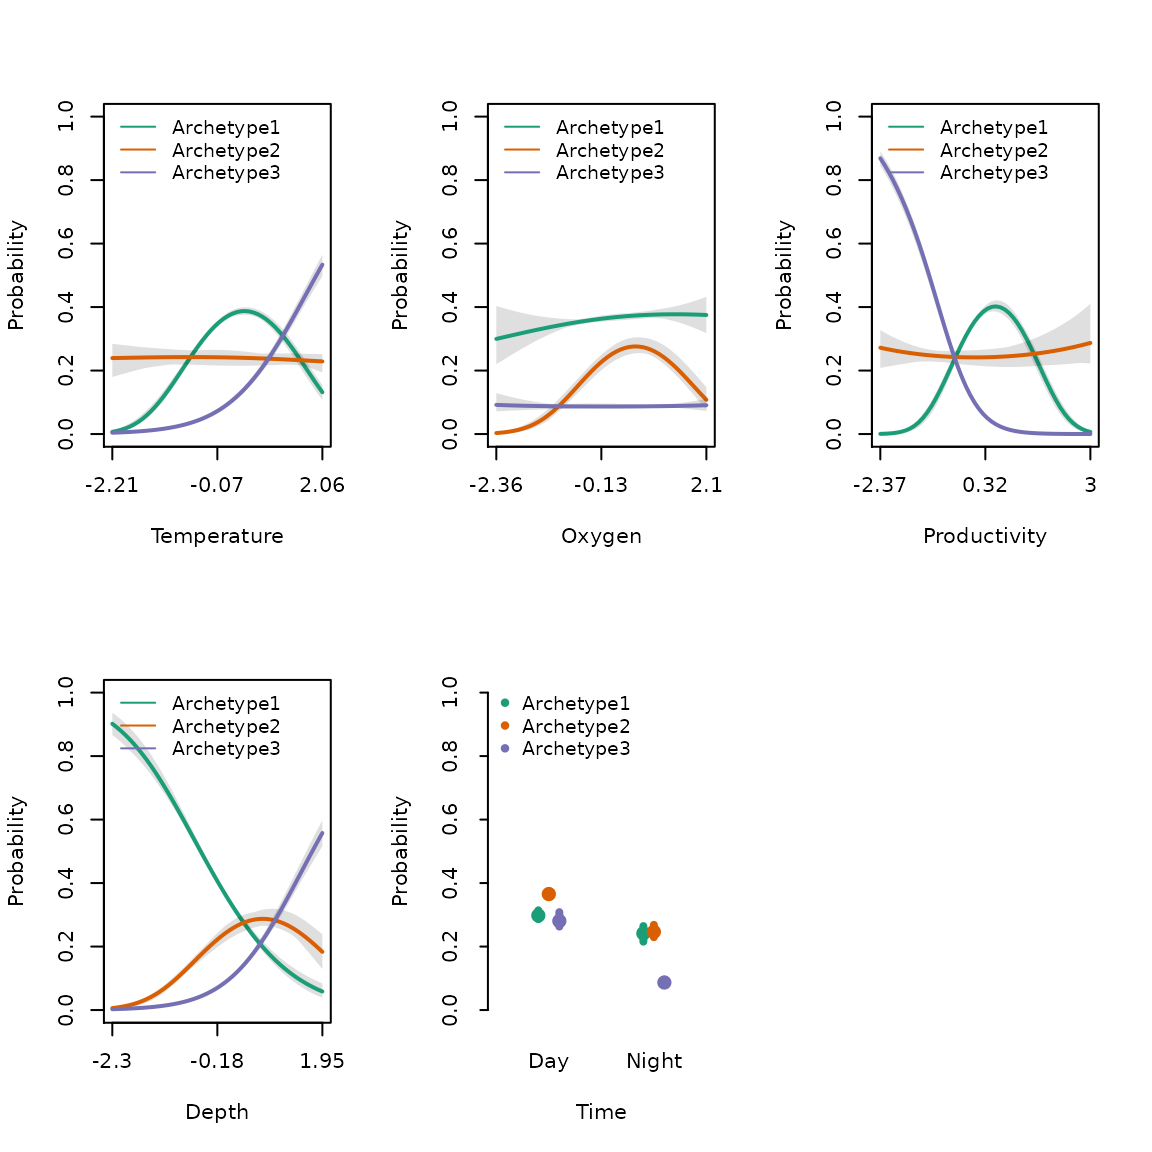 Figure 6. Partial response plots for each covariate in the model.